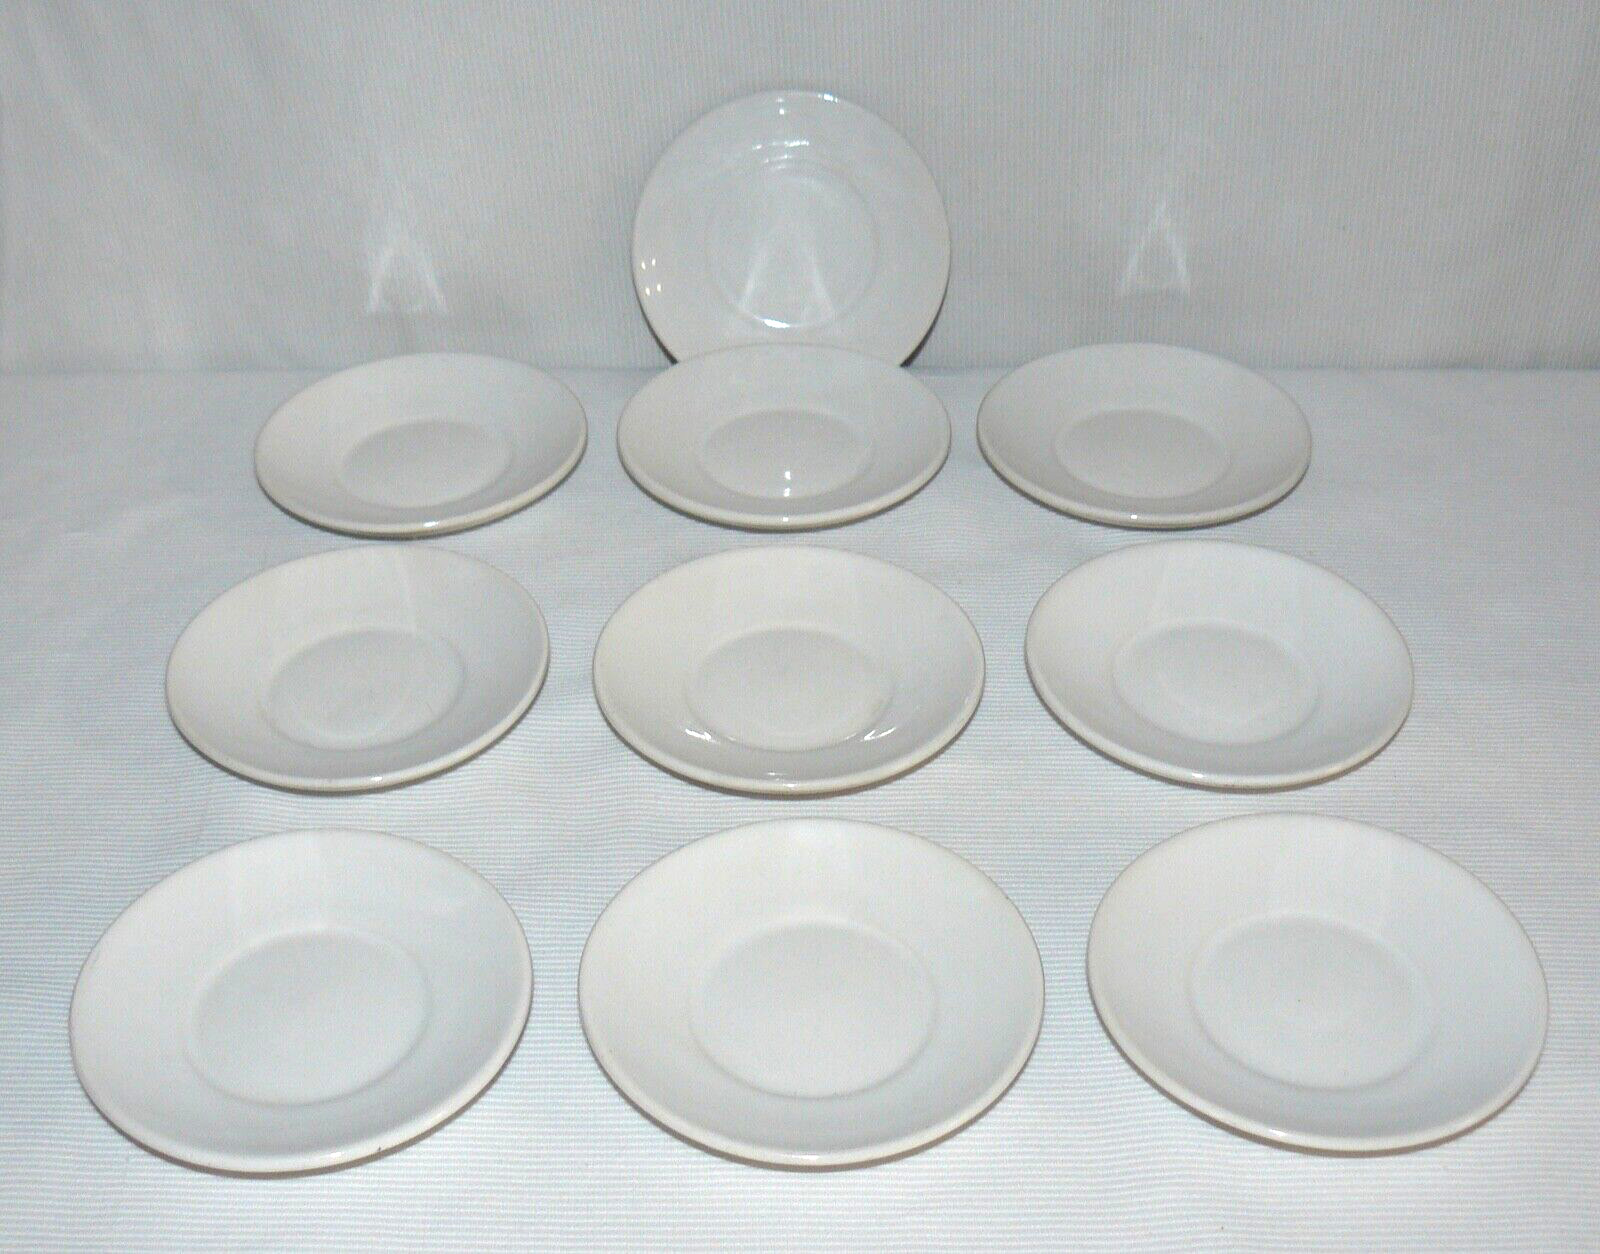 Made Exclusively For Starbucks Set 10 Matching Ceramic Demitasse Lone Saucers